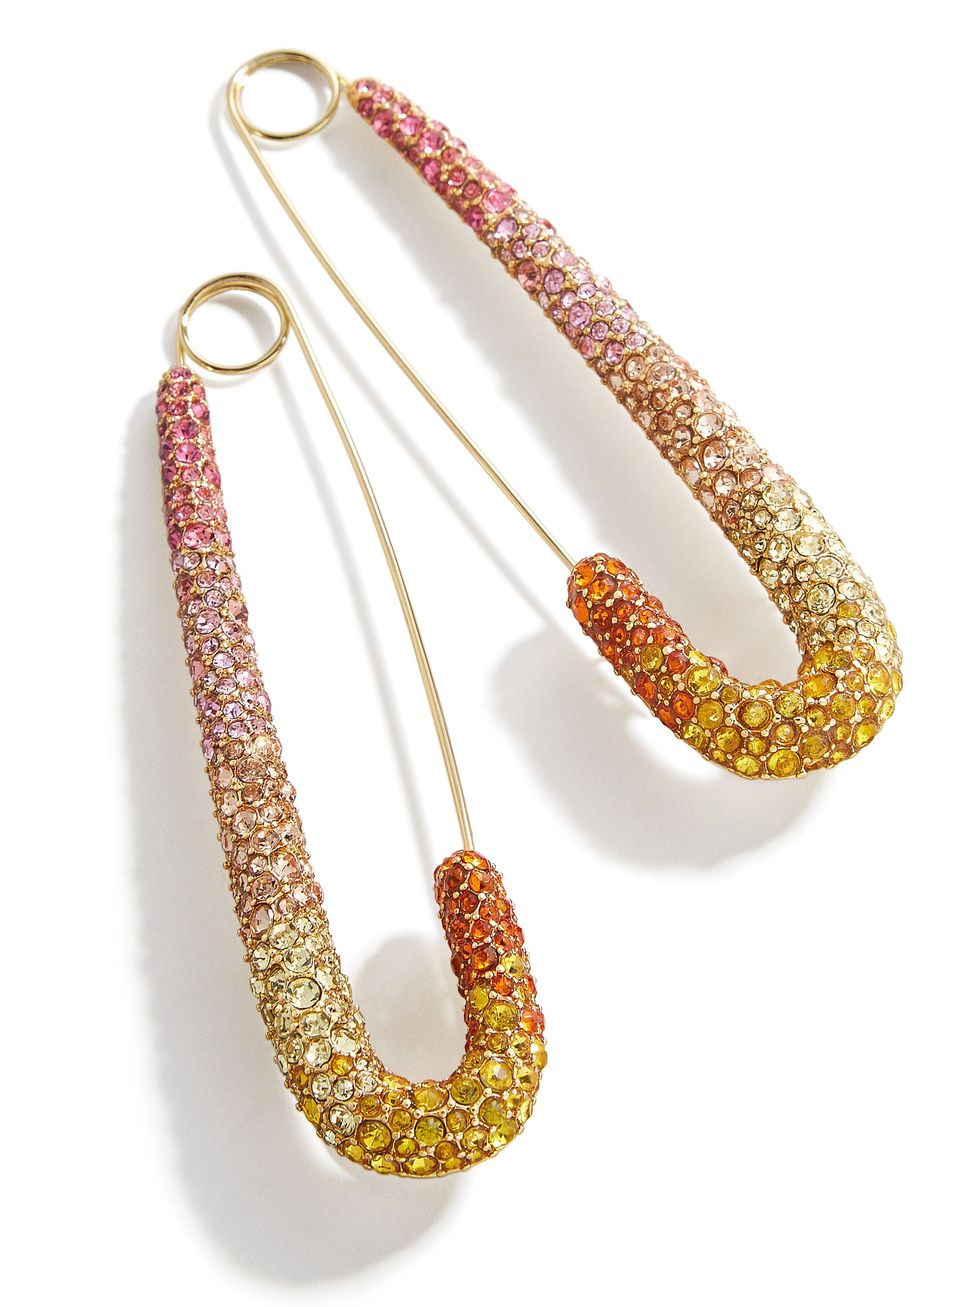 Large Pavé Safety Pin Earrings in Pink and Yellow